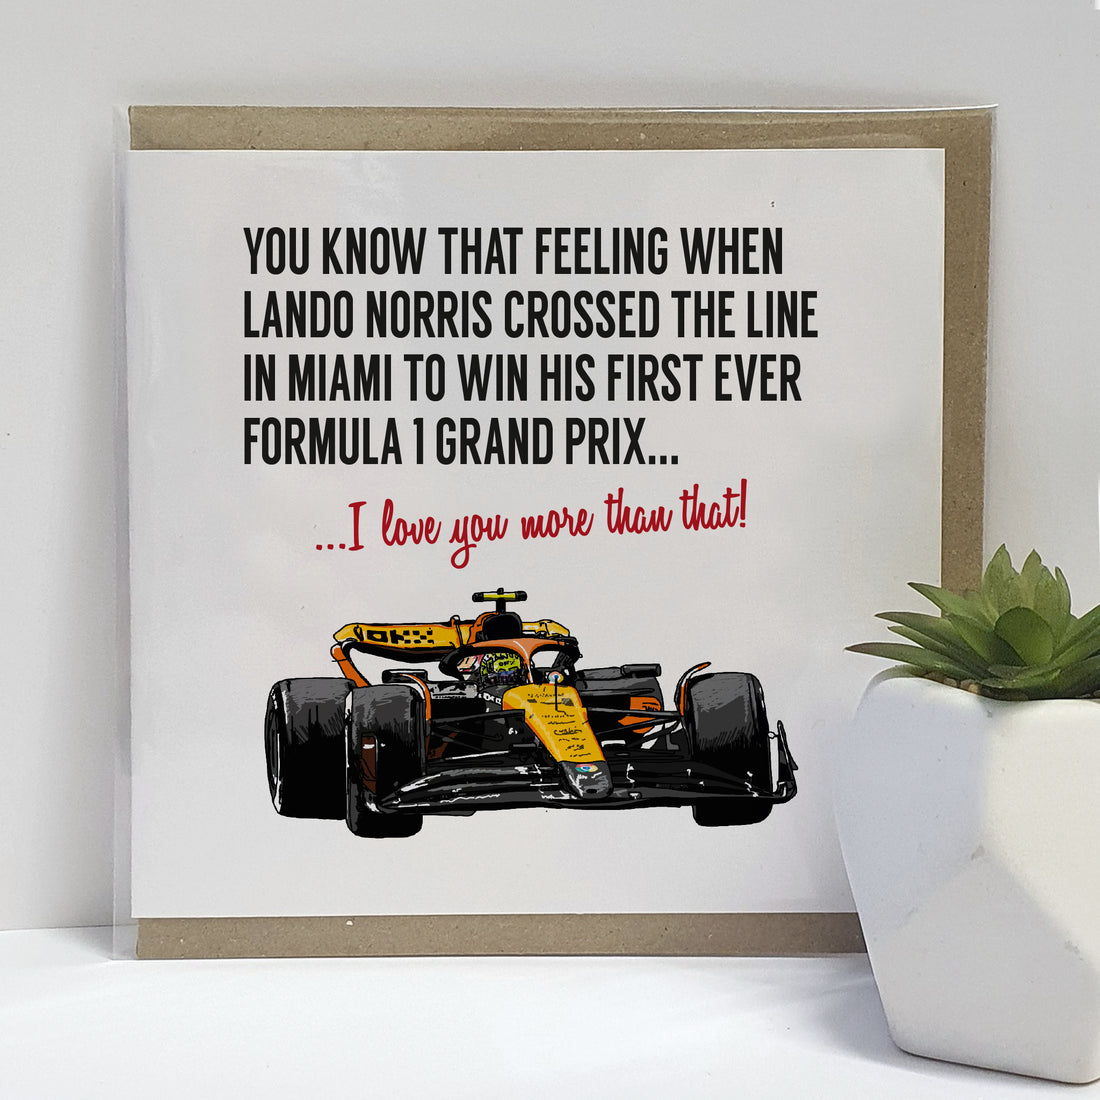 Greeting card featuring an illustration of a Formula 1 car driven by Lando Norris at the moment of his first victory in Miami. The card includes the text 'You know that feeling when Lando Norris crossed the line in Miami to win his first ever Formula 1 Grand Prix... I love you more than that!' Designed by Local Lingo, this card emphasizes the excitement of Formula 1 racing and celebrates a significant moment in the sport.